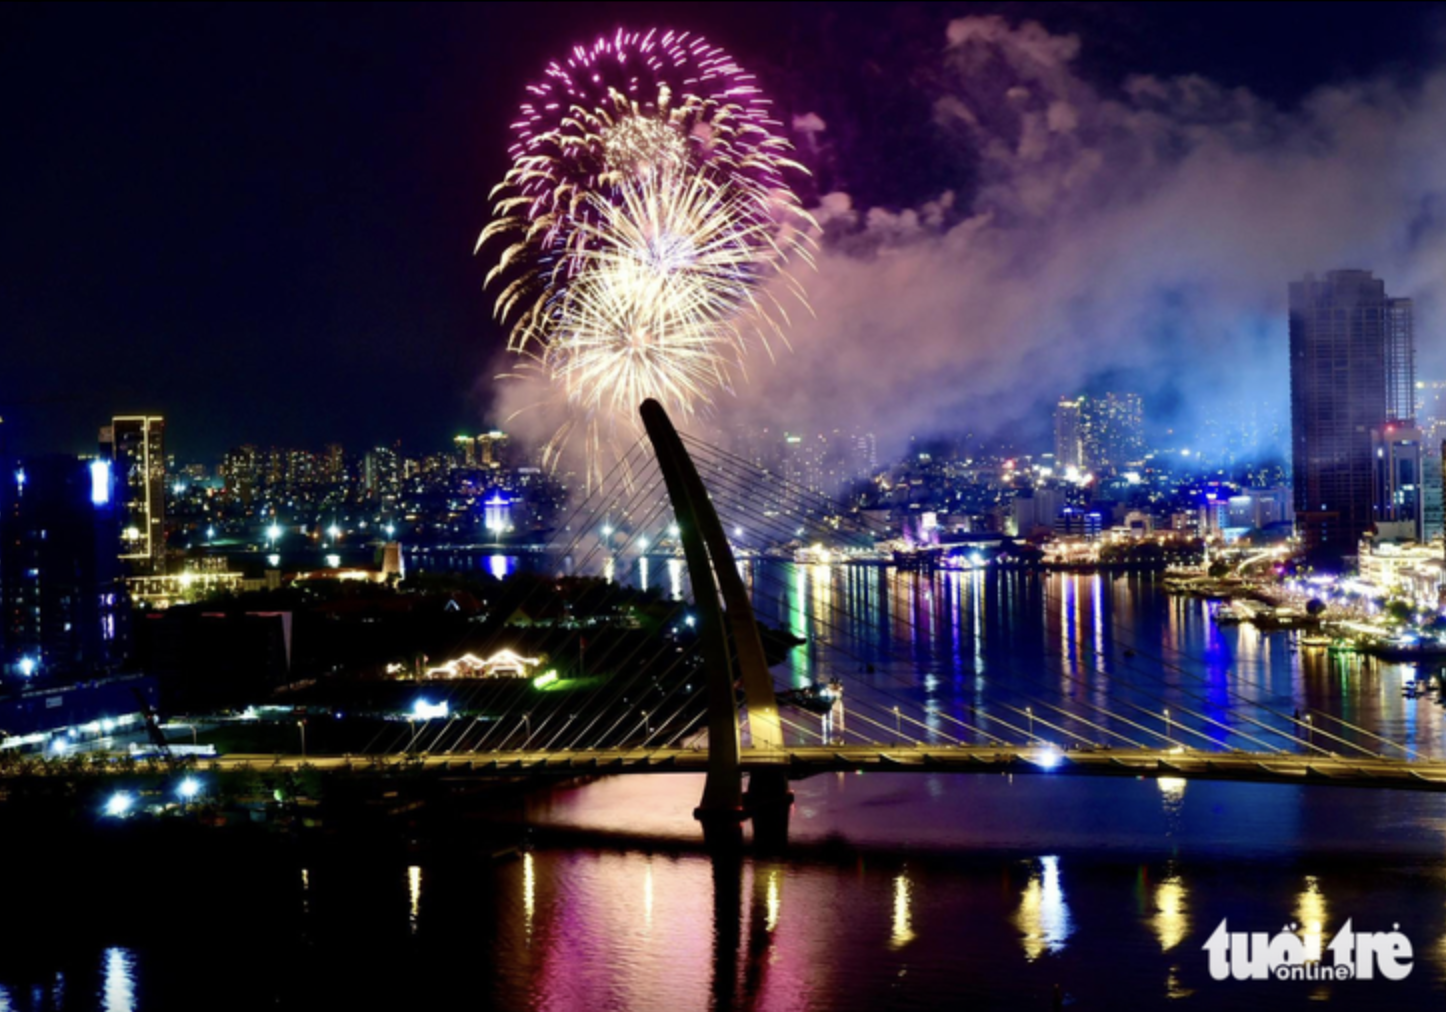 Ho Chi Minh City reduces Reunification Day fireworks to 5 venues from 16